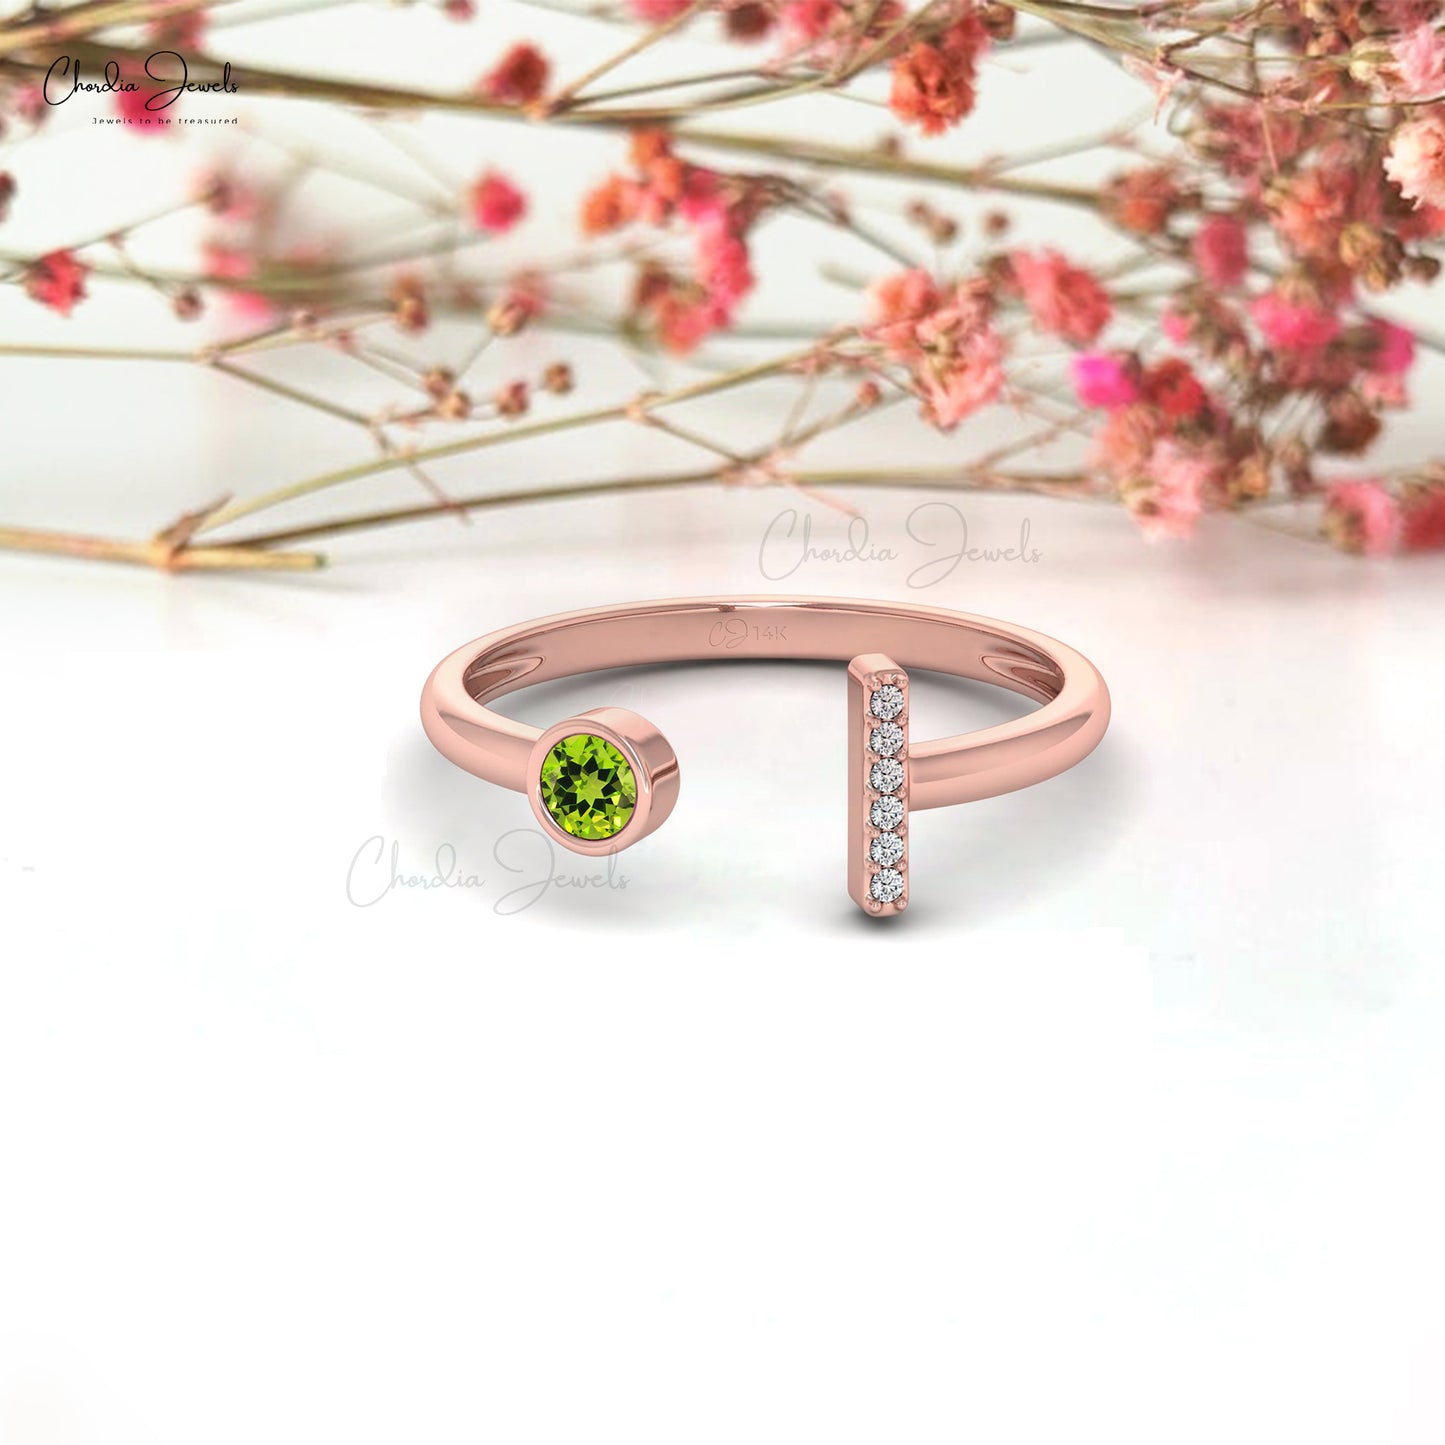 Genuine Peridot 3mm Round Cut Gemstone Proposal Ring 14k Solid Gold Diamond Vintage Ring For August Birthstone Fine Jewelry